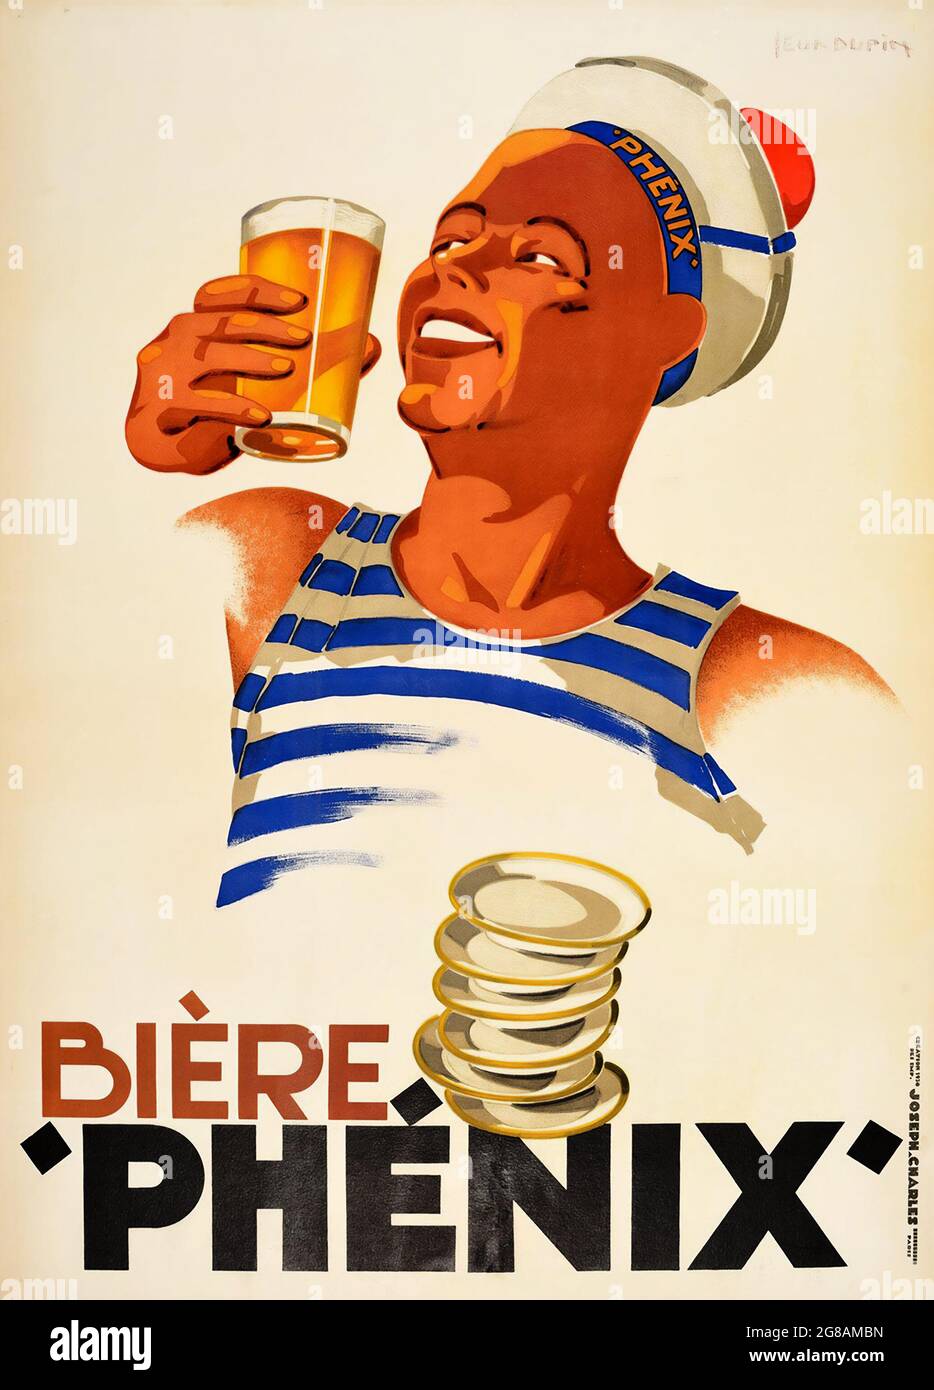 Bière Phénix’, 1930 – Vintage advertisement for alcohol. Old times advertising with a sailor drinking a beer. Stock Photo